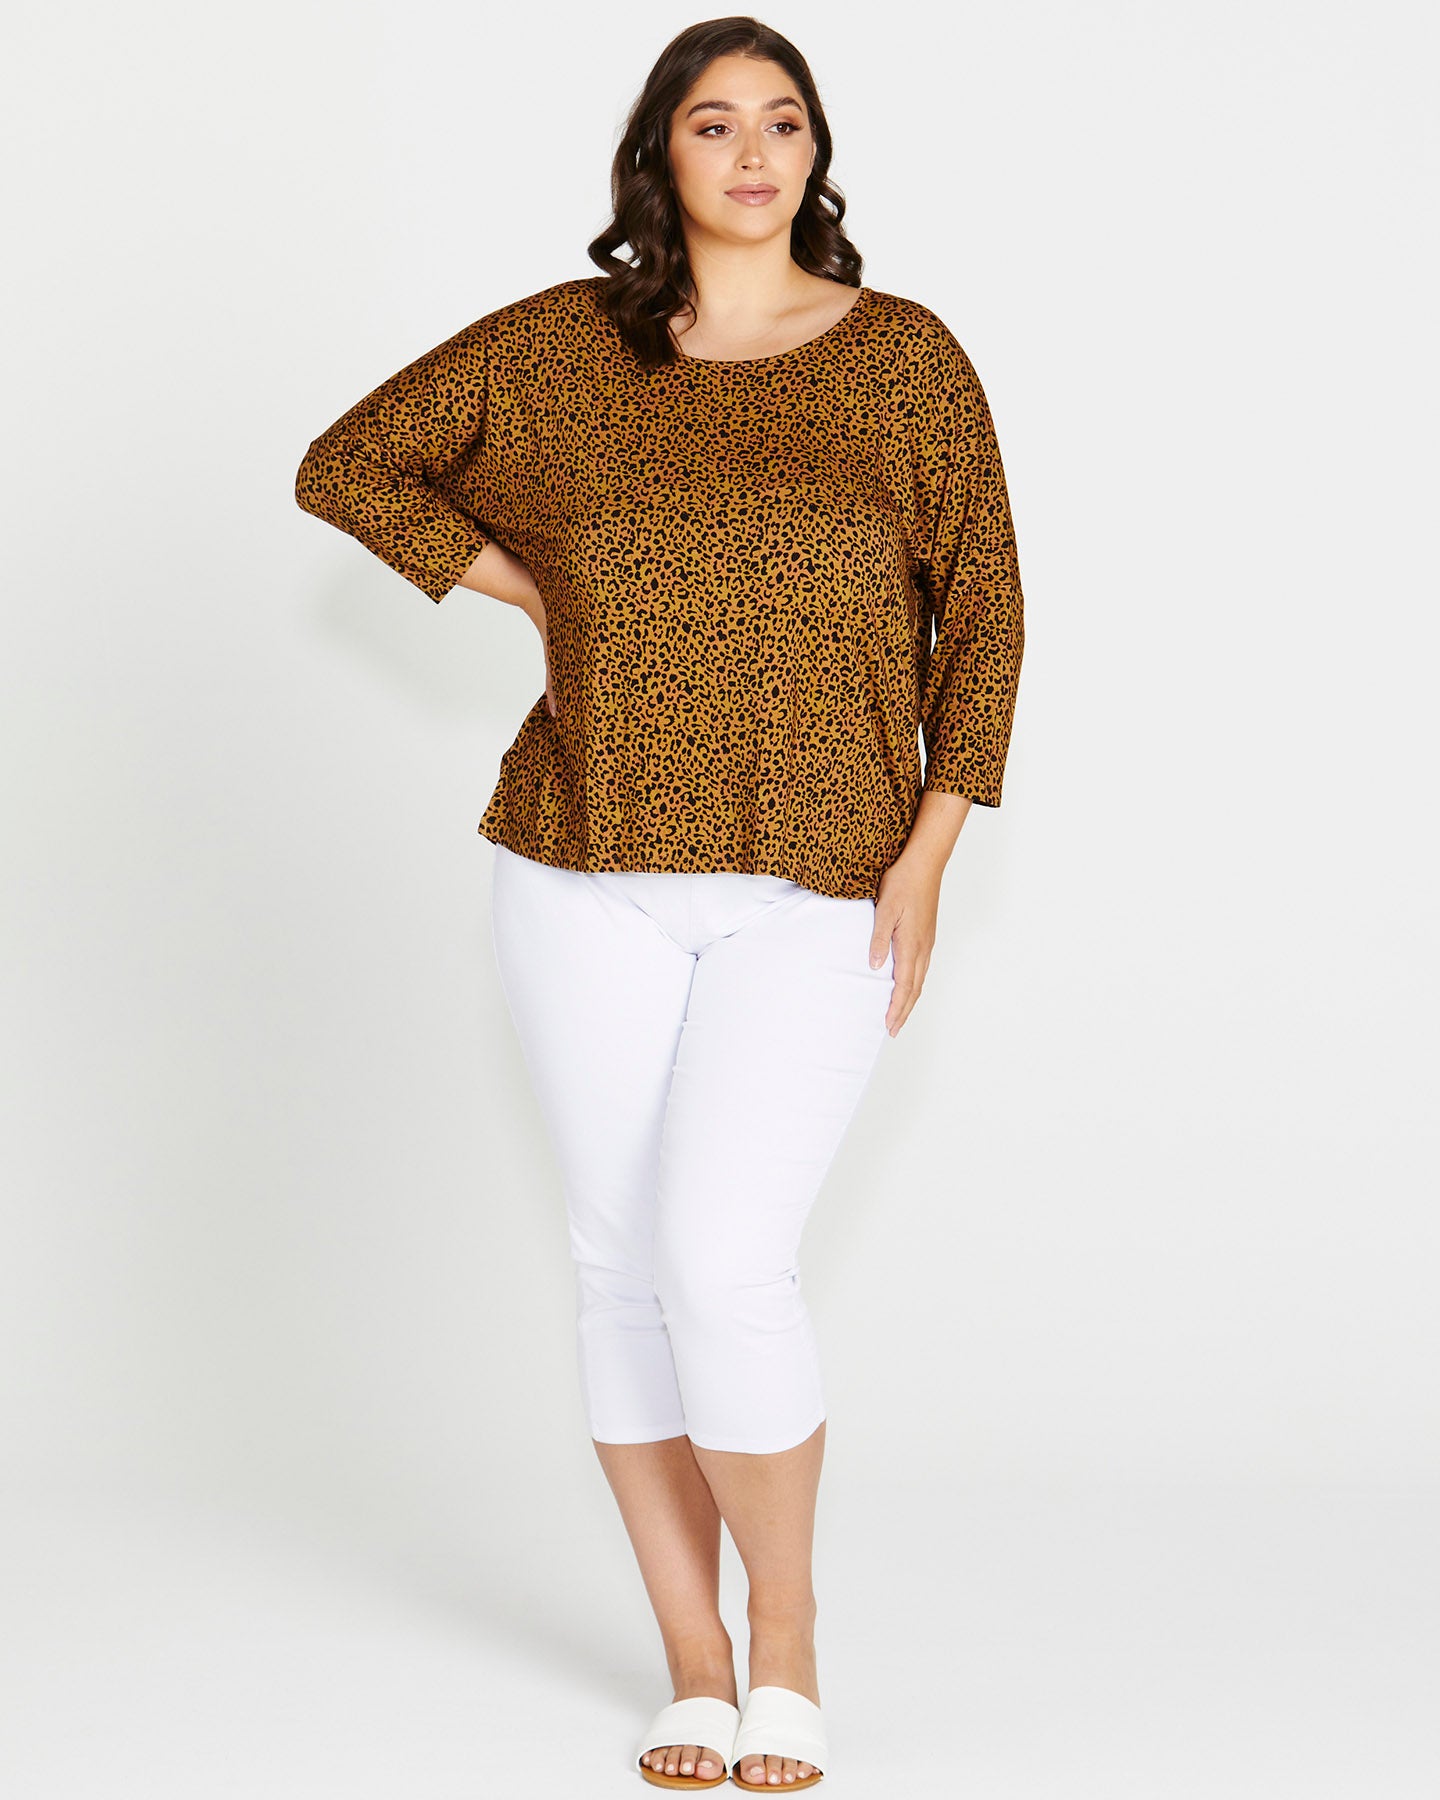 Milan Stretchy Draped Relaxed 3/4 Sleeve Basic Top - Wild Leopard Print